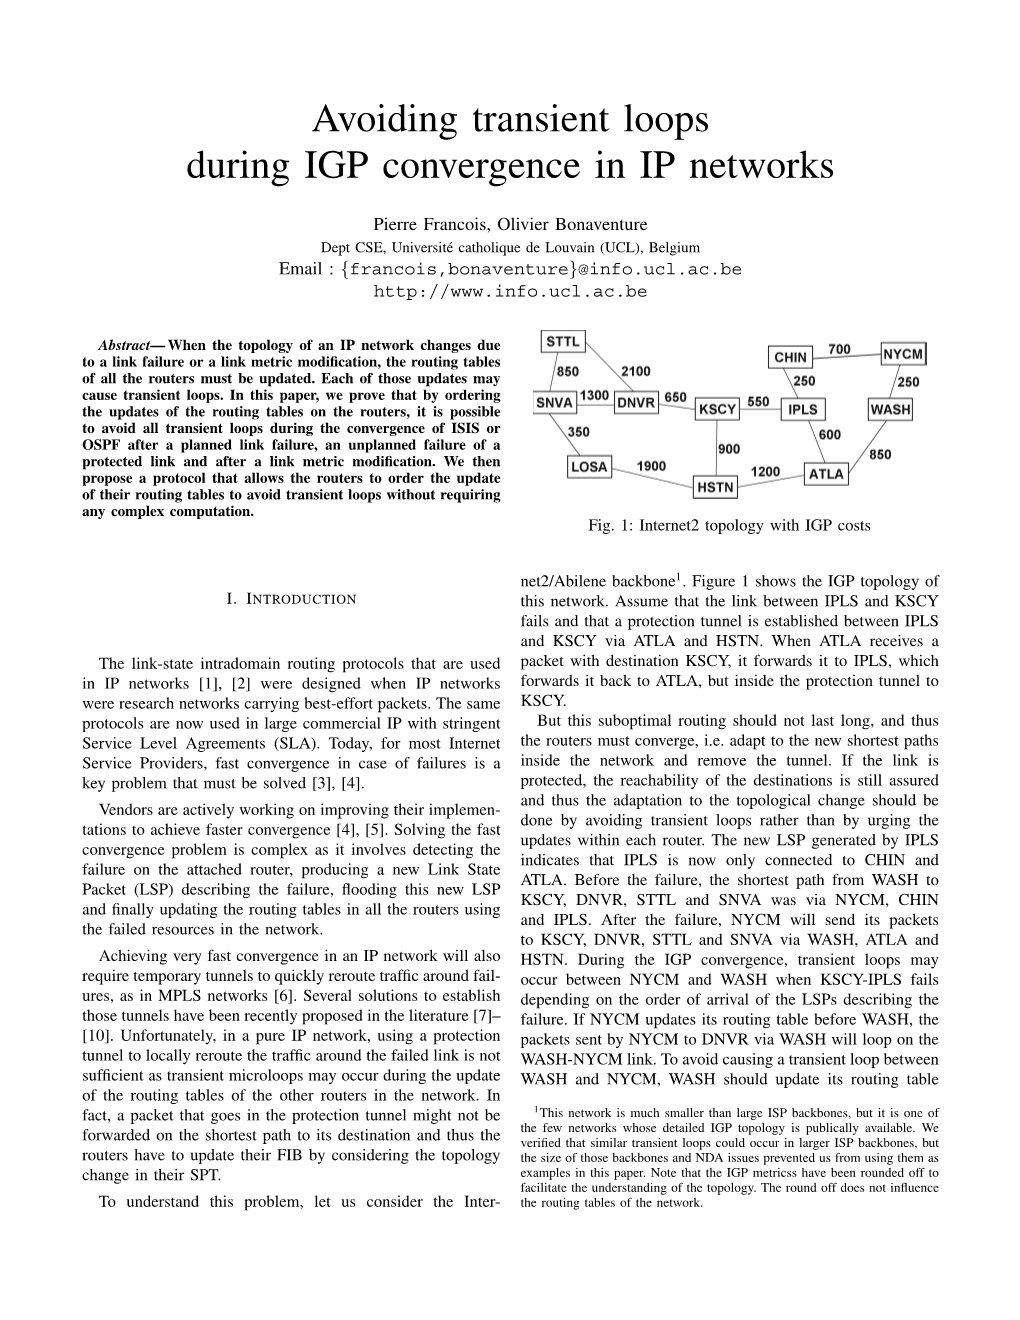 Avoiding Transient Loops During IGP Convergence in IP Networks